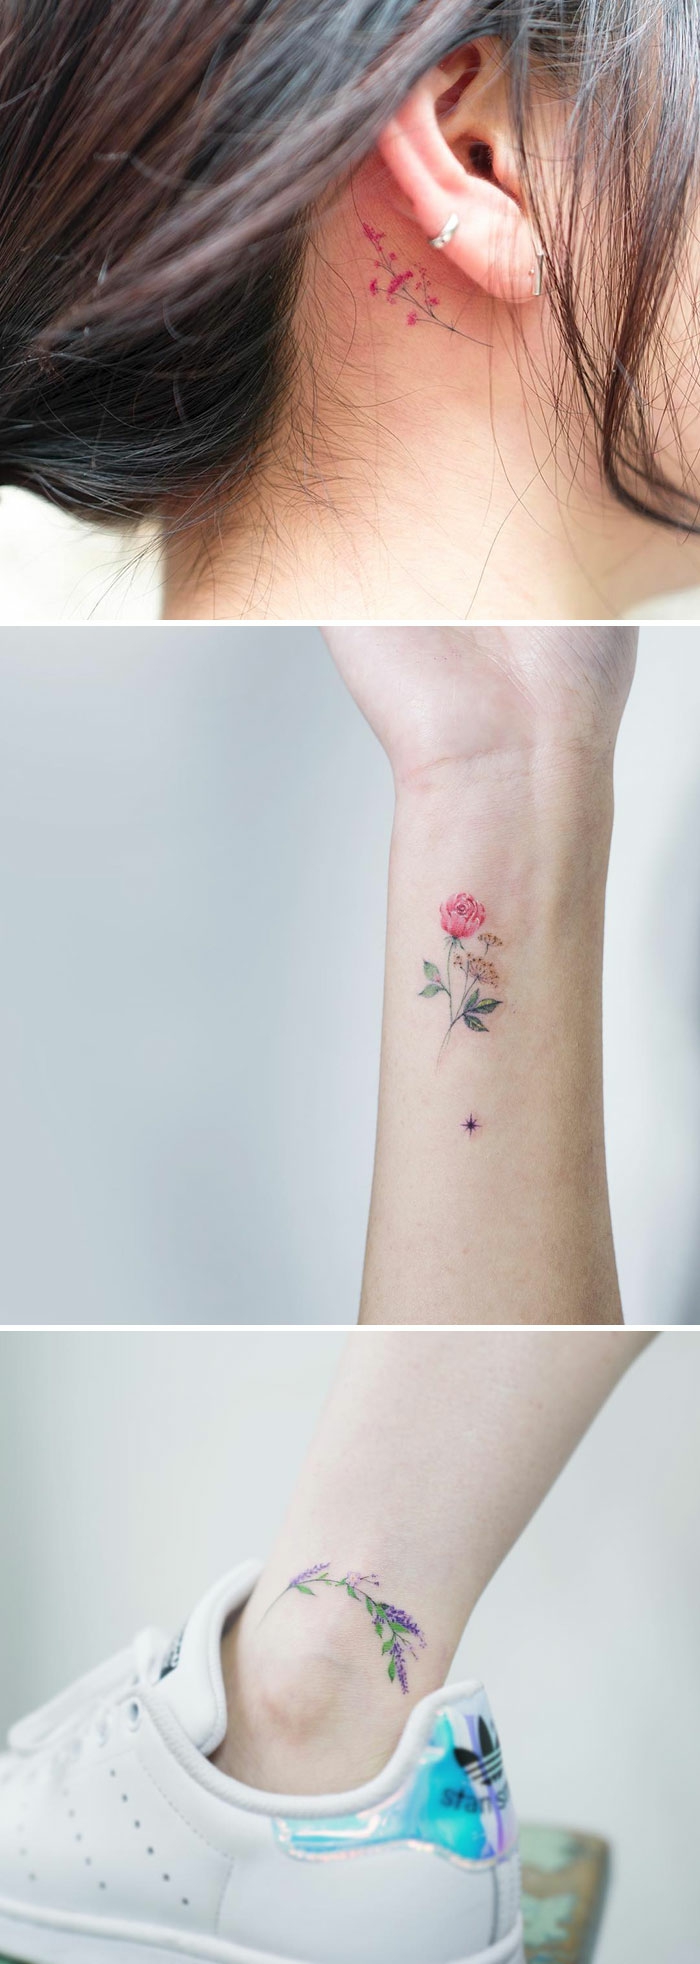 wildflower tattoo, thin and tiny floral tattoo, in red and green, behind a brunette woman's ear, a small rose tattoo, crossed with a yellow plant, near a star, on a person's lower arm, an ankle tattoo of a green and purple plant